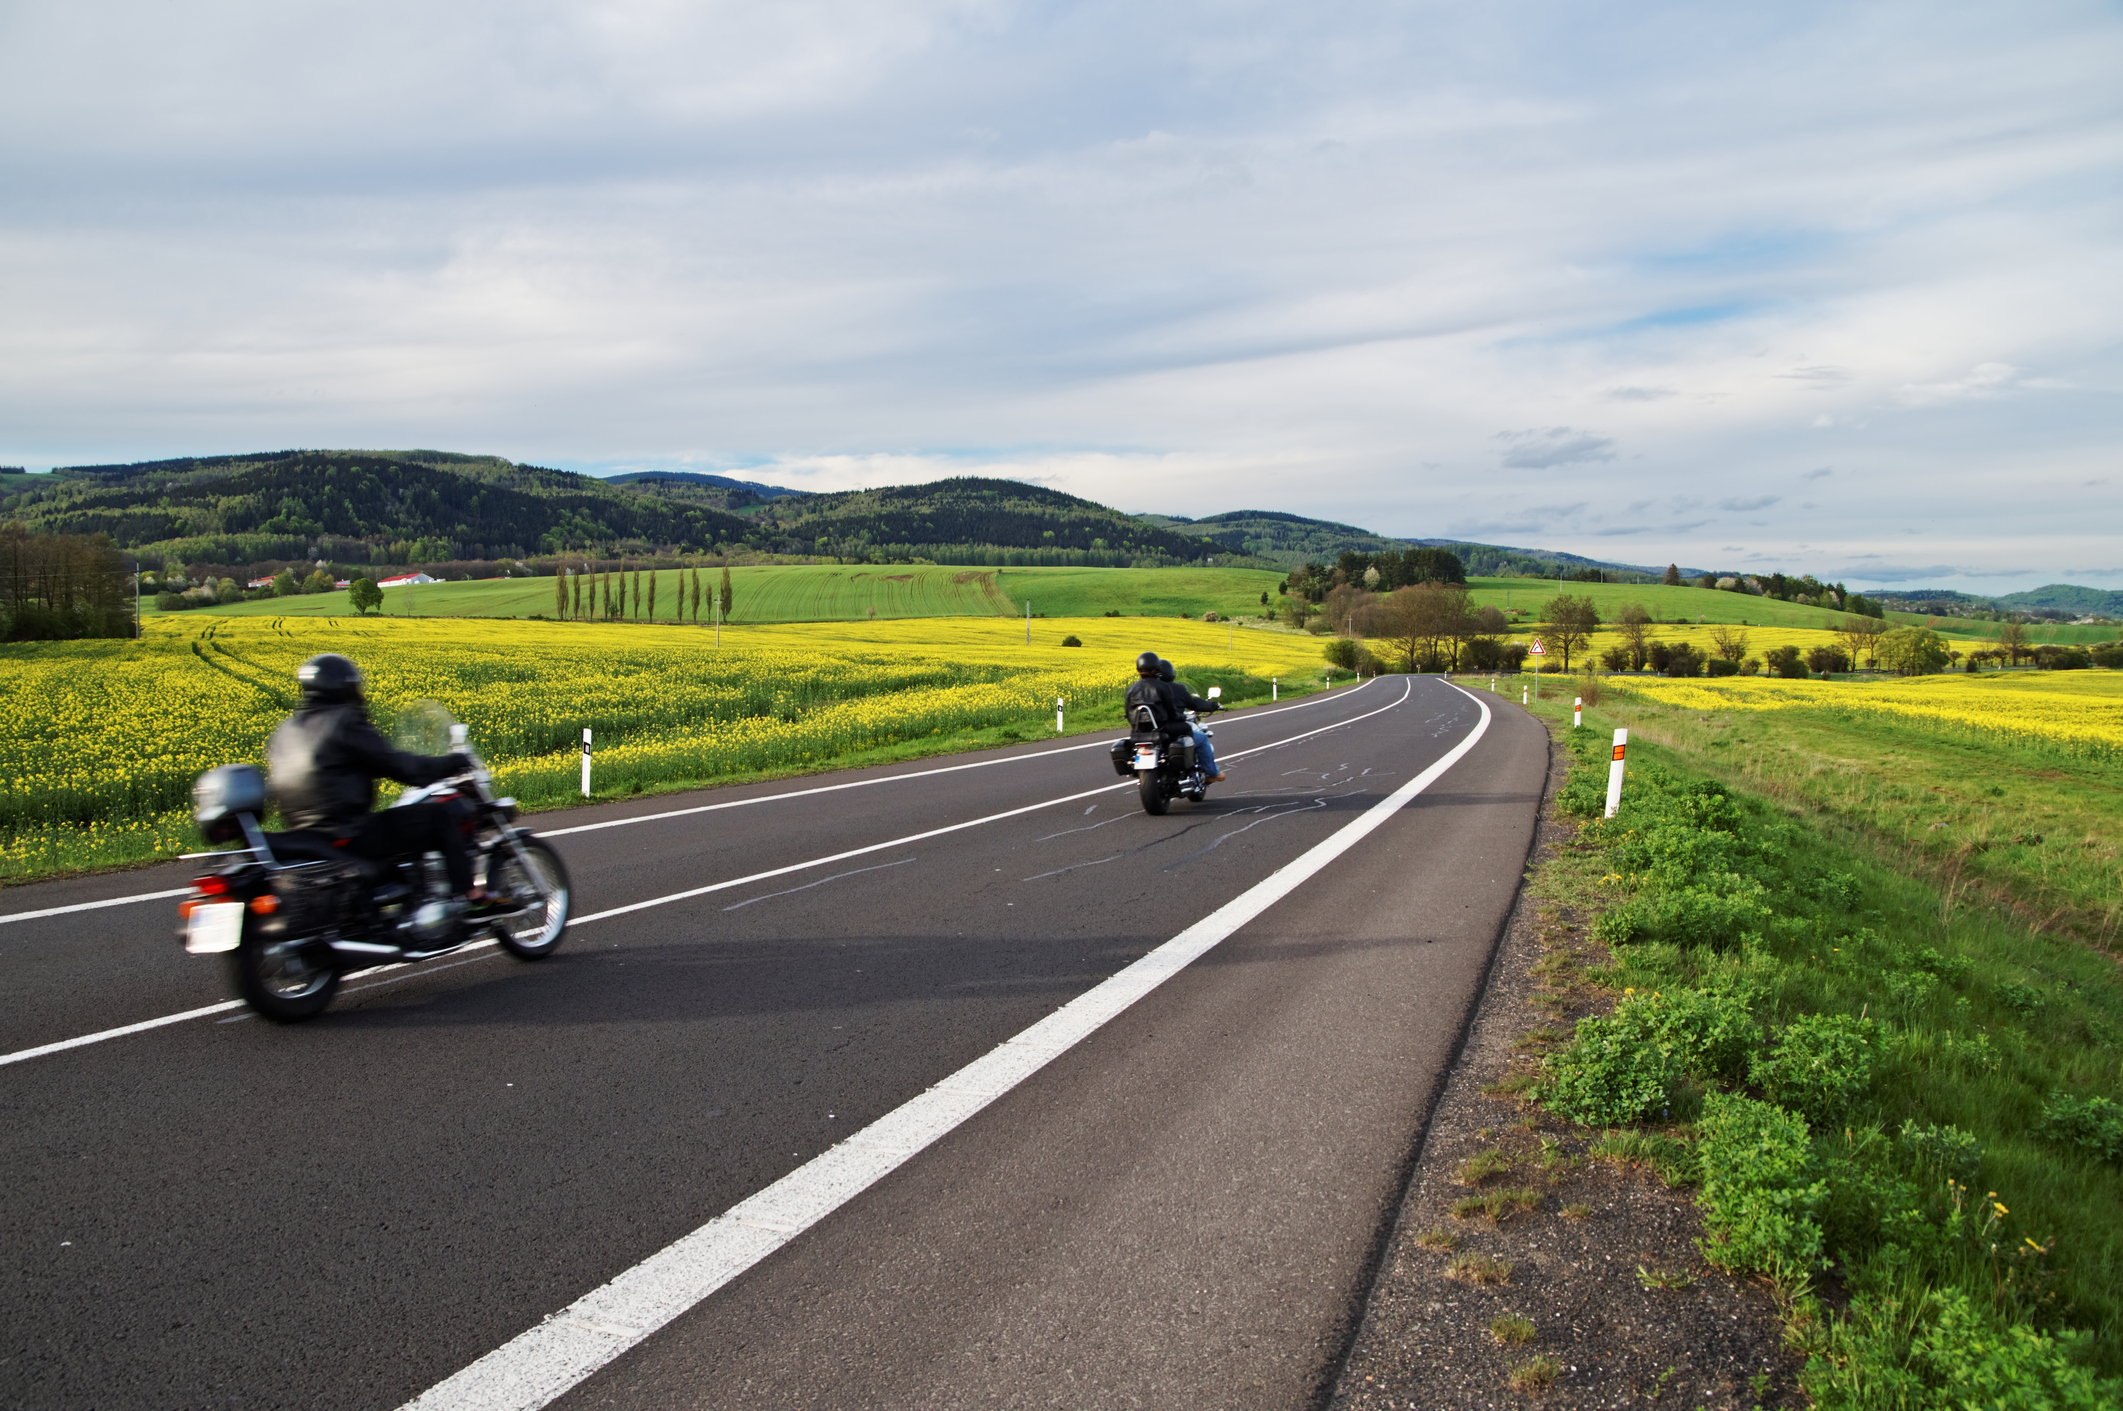 Not So Fast: Share the Road with Motorcycles